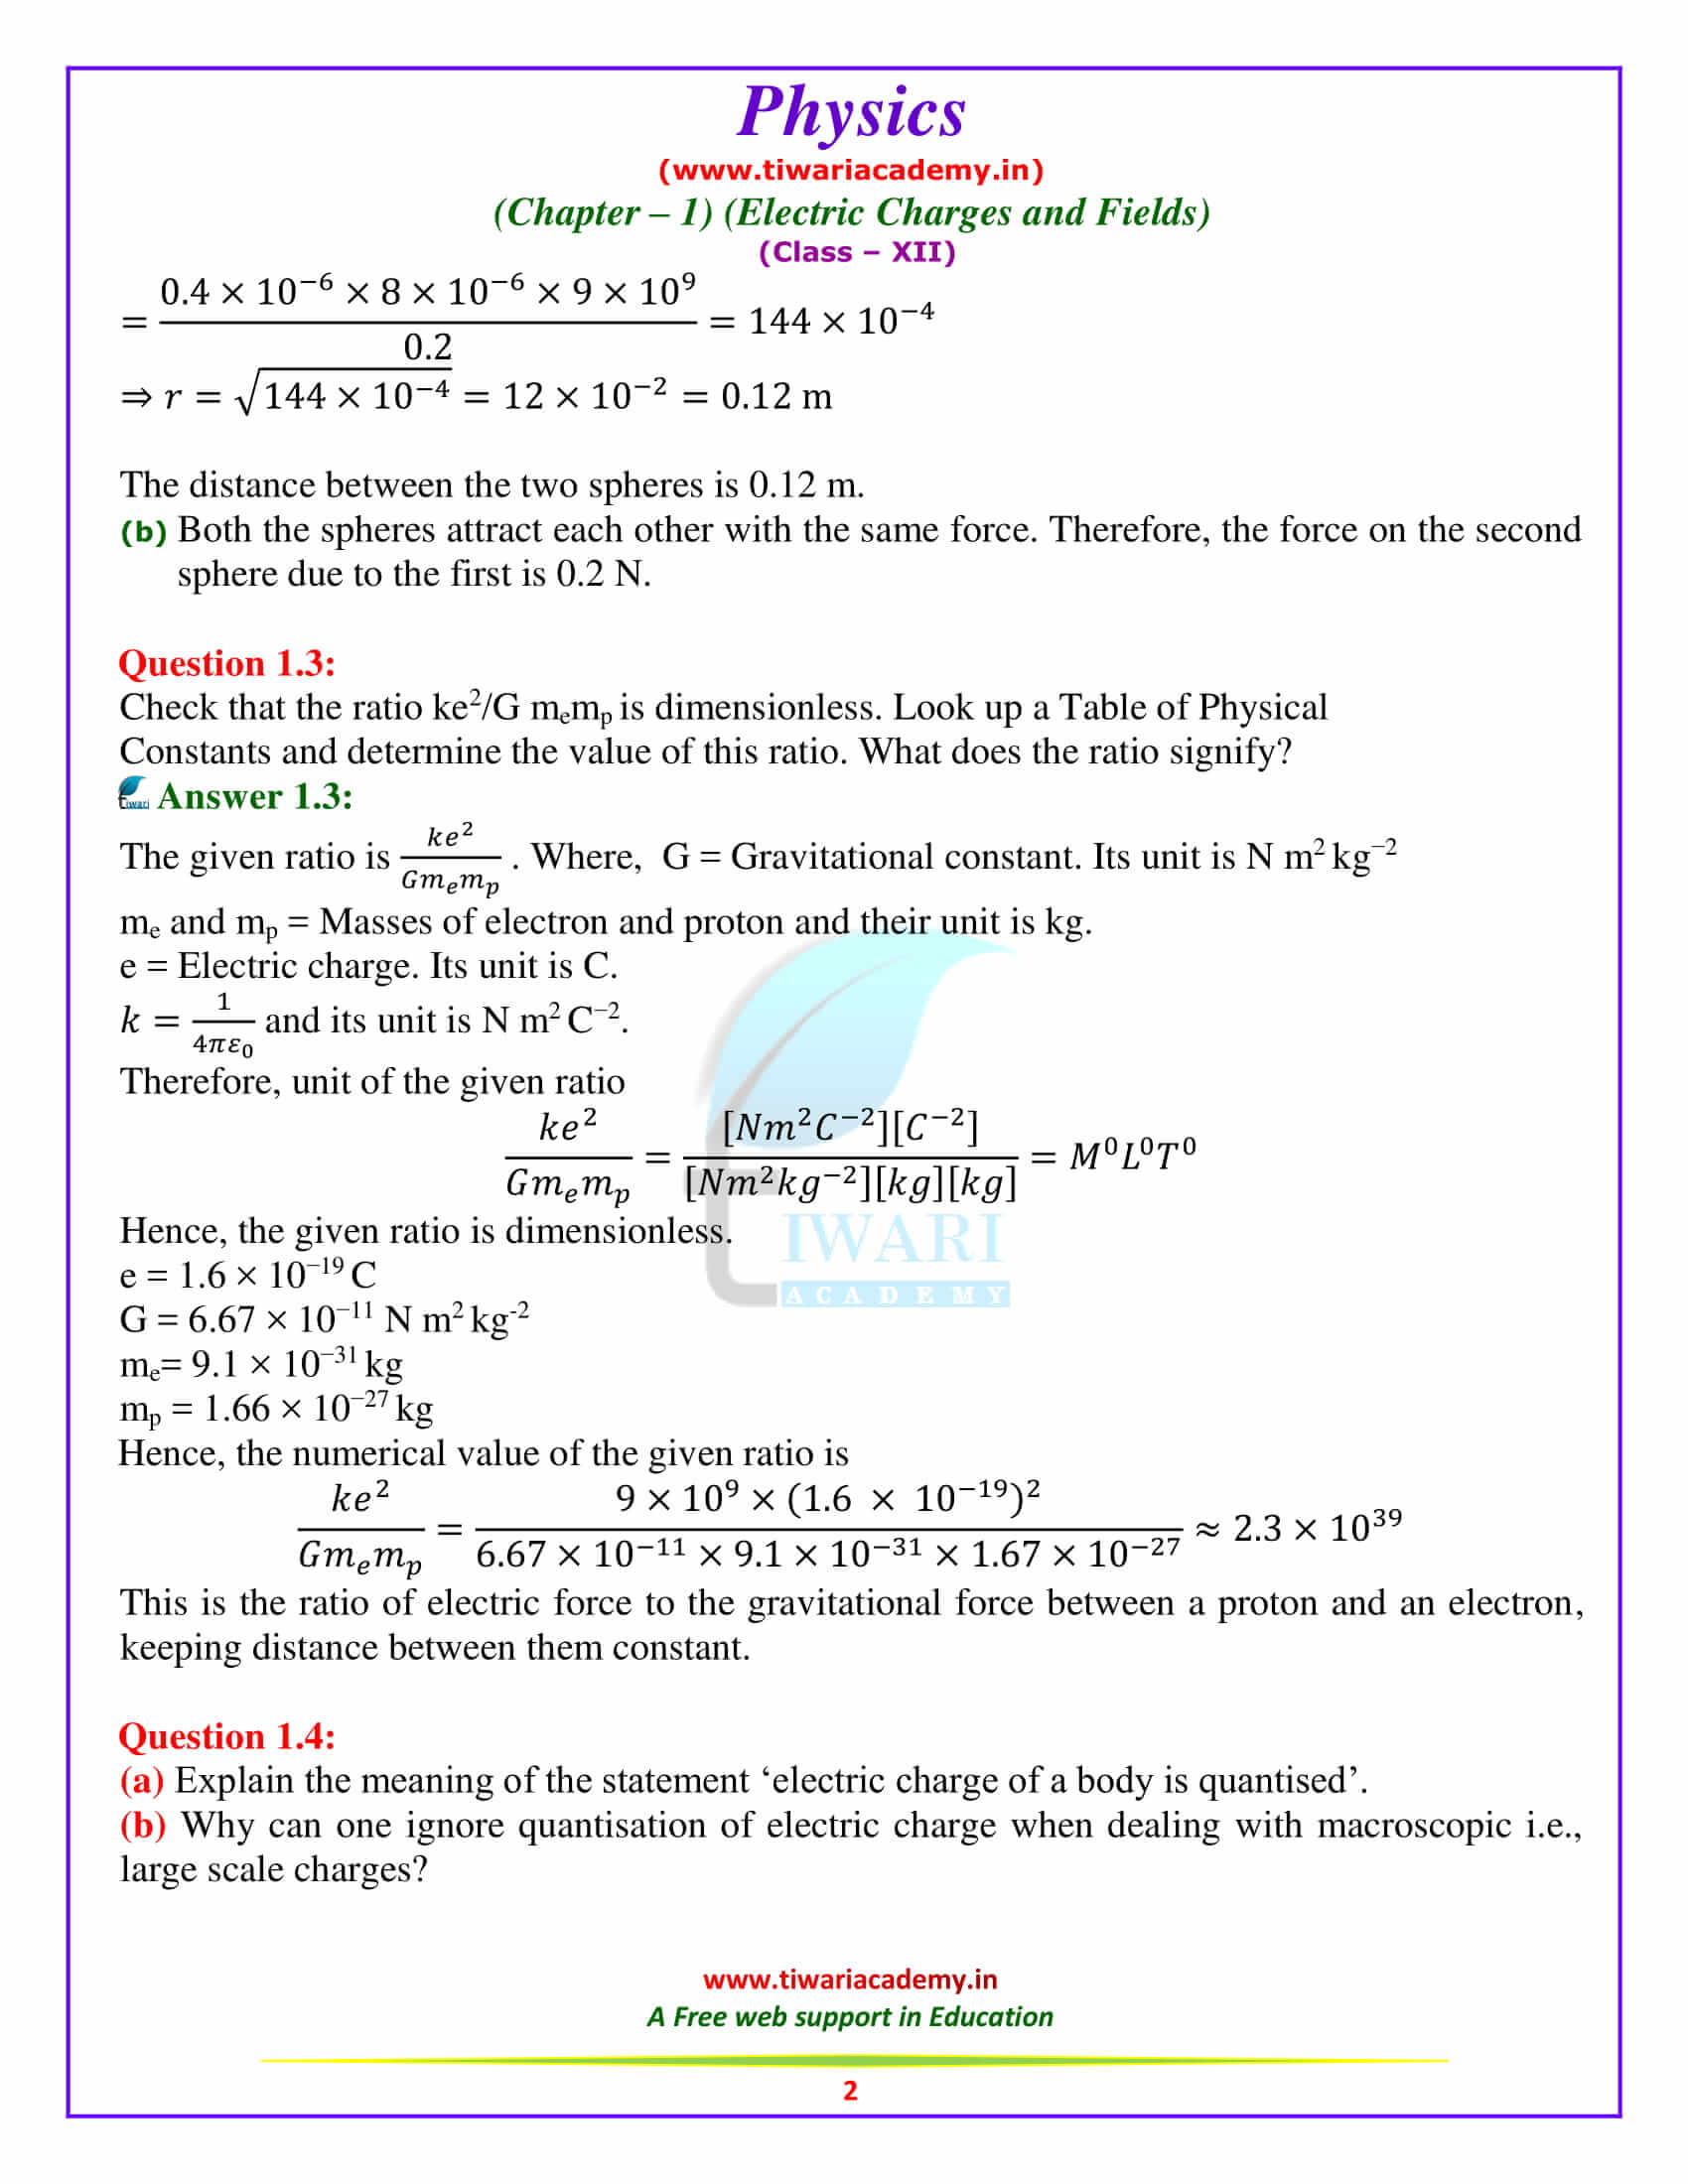 NCERT Solutions for Class 12 Physics Chapter 1 Electric Charges and Fields in pdf form